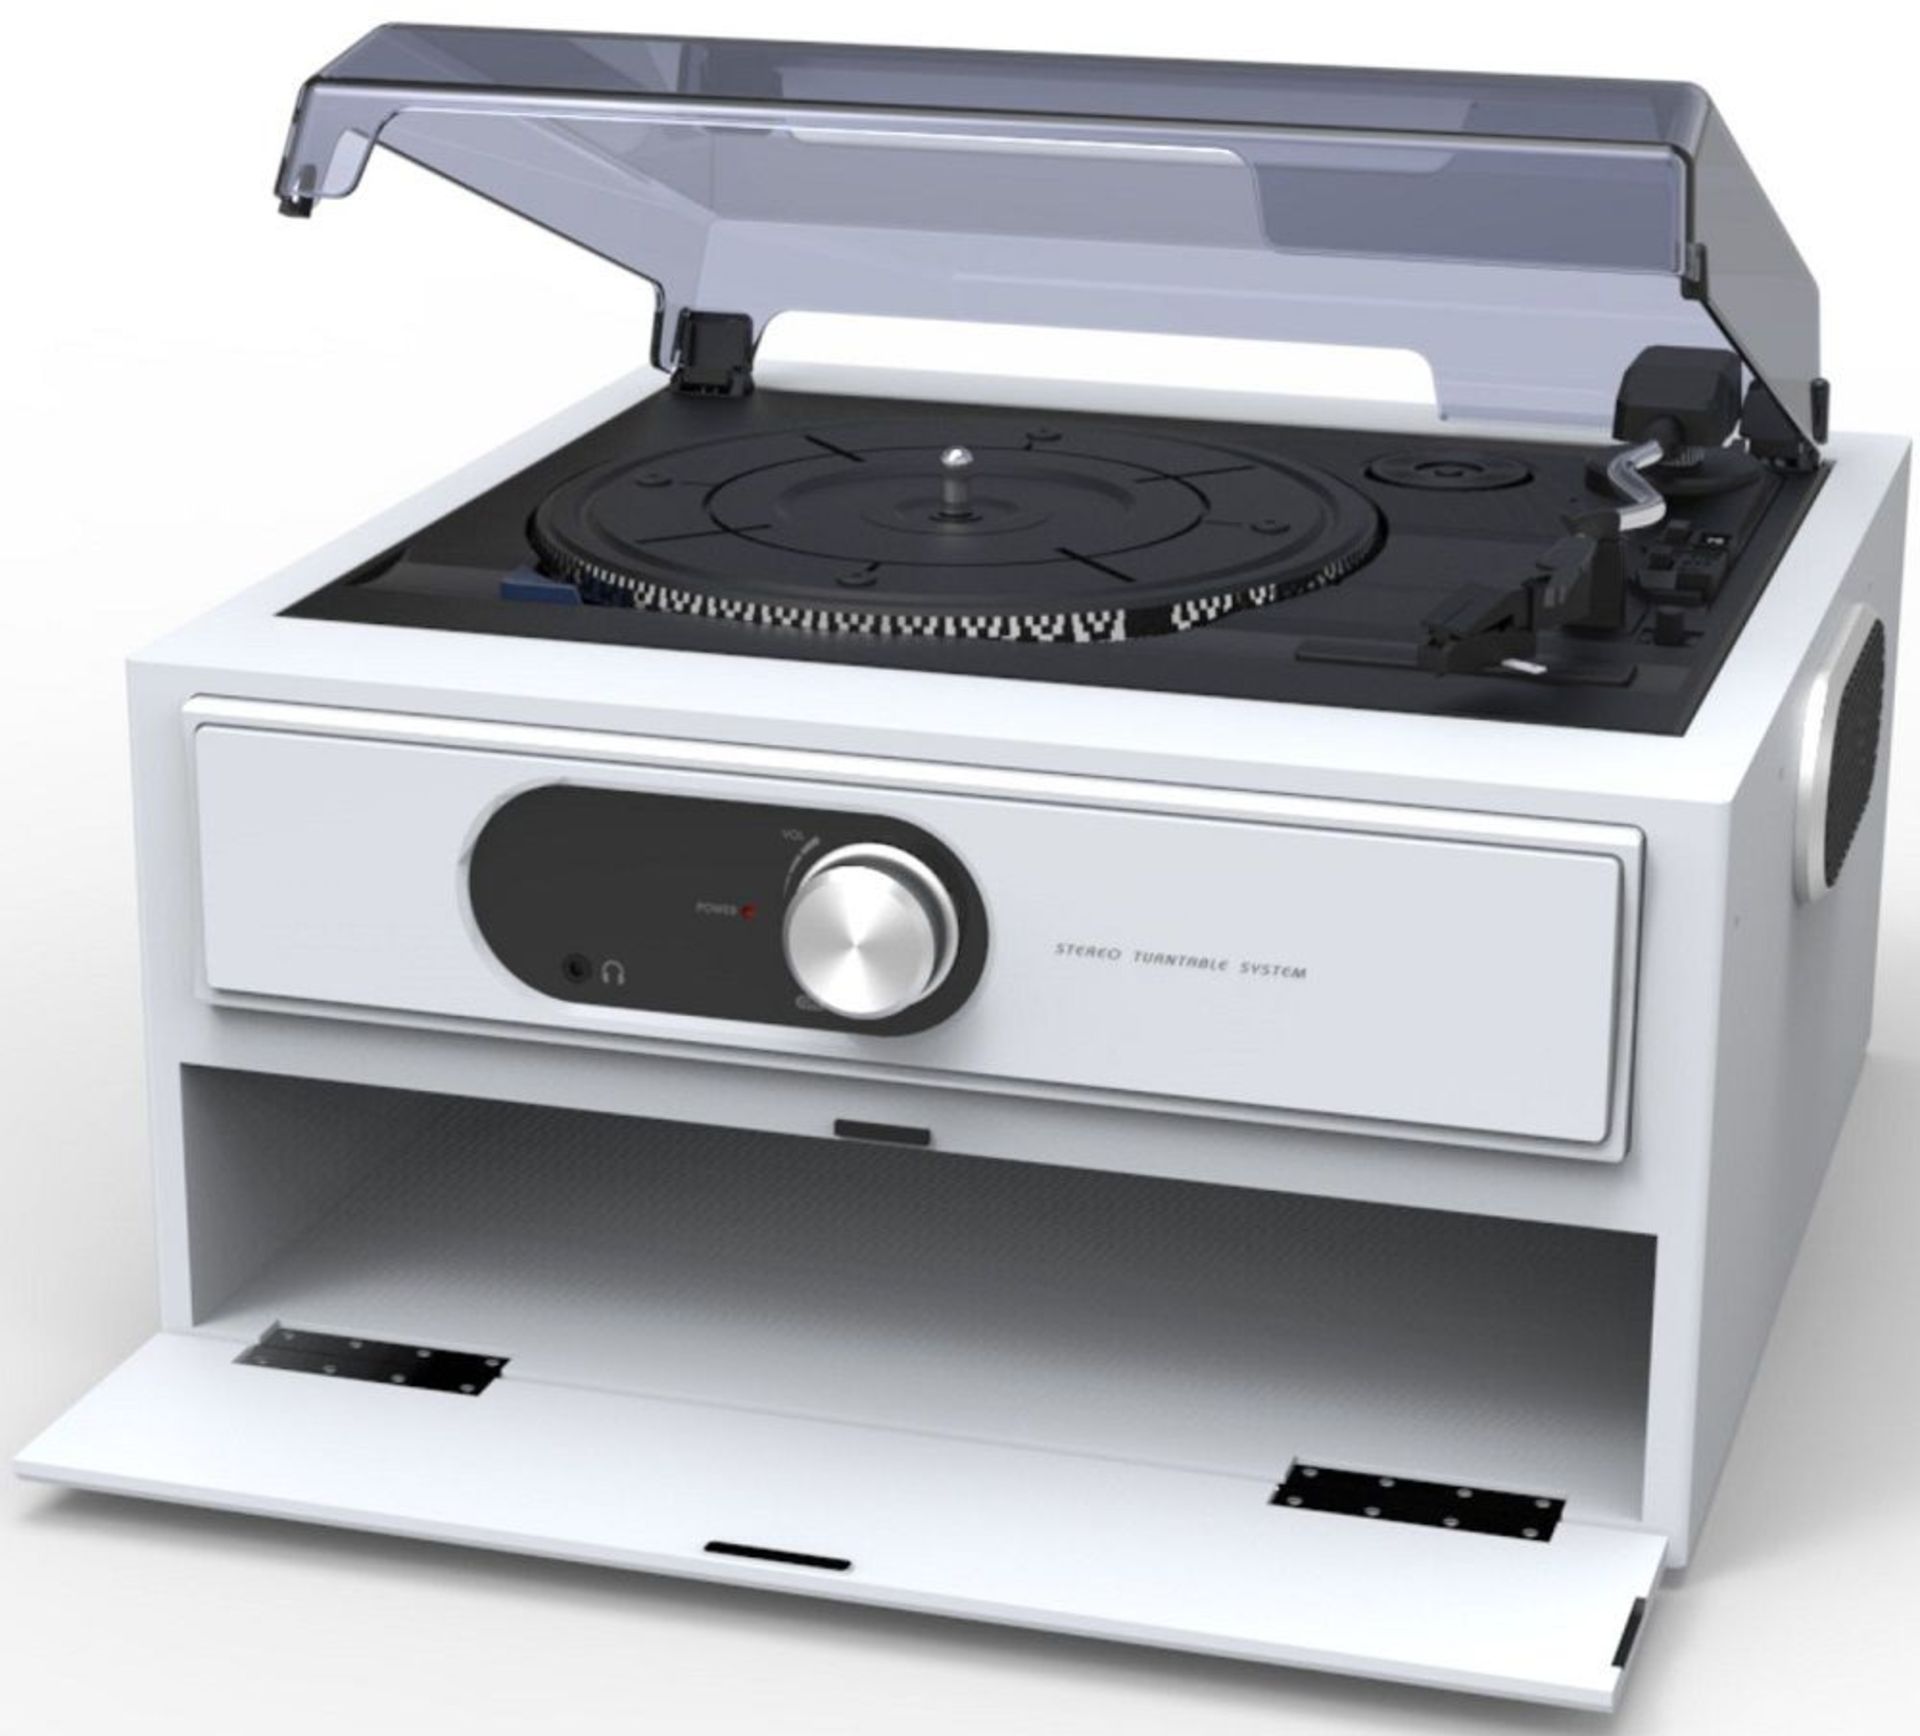 V Brand New Steepletone Deckster Three Speed Turntable With Built In Record Storage - Amazon